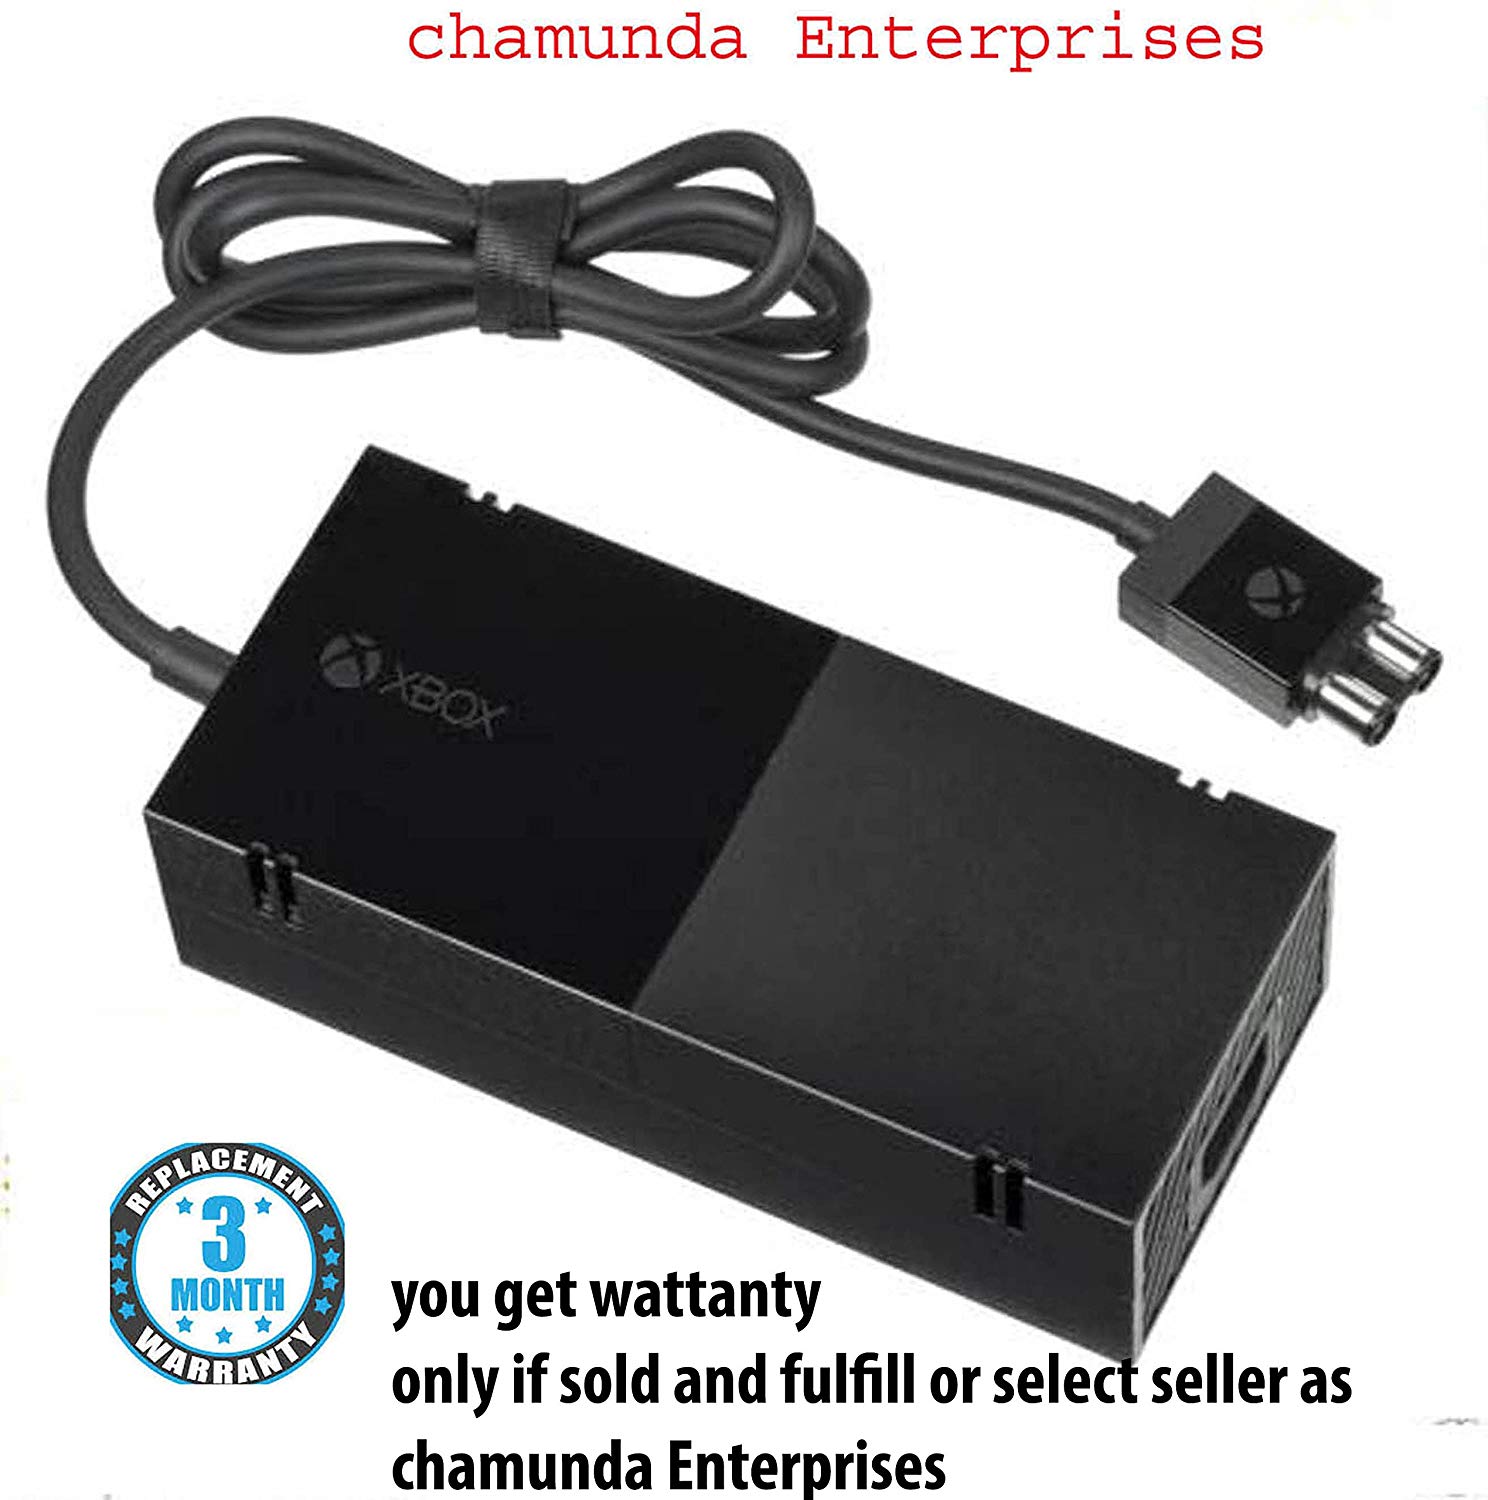 New World Power Supply Adapter for Microsoft Xbox One Console 220 v India Use with 3 month warranty [video game]